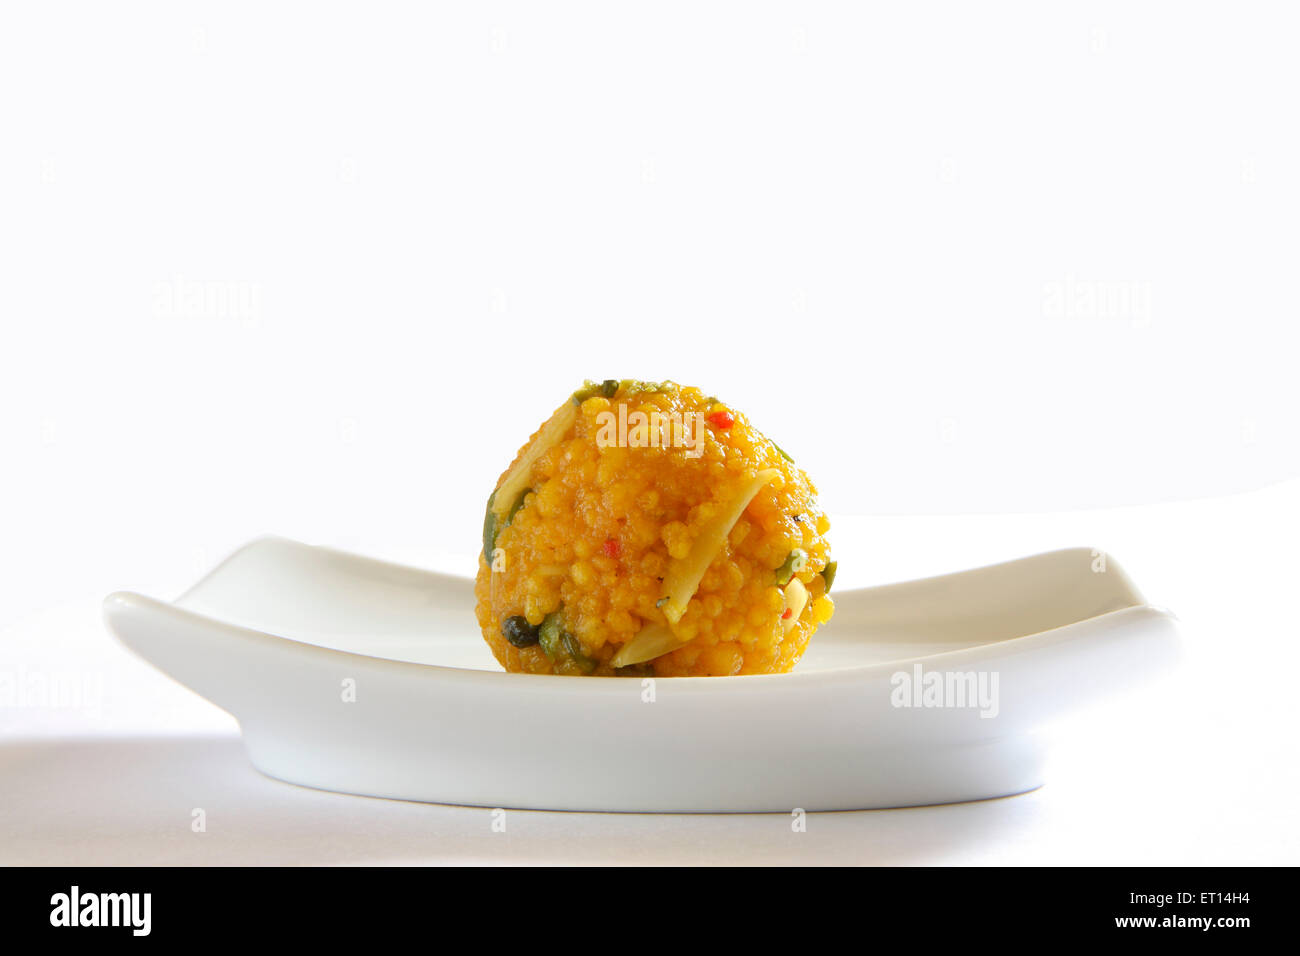 Mithai ; one piece of motichur or boondi dryfruit laddoo in rectangle plate on white background Stock Photo